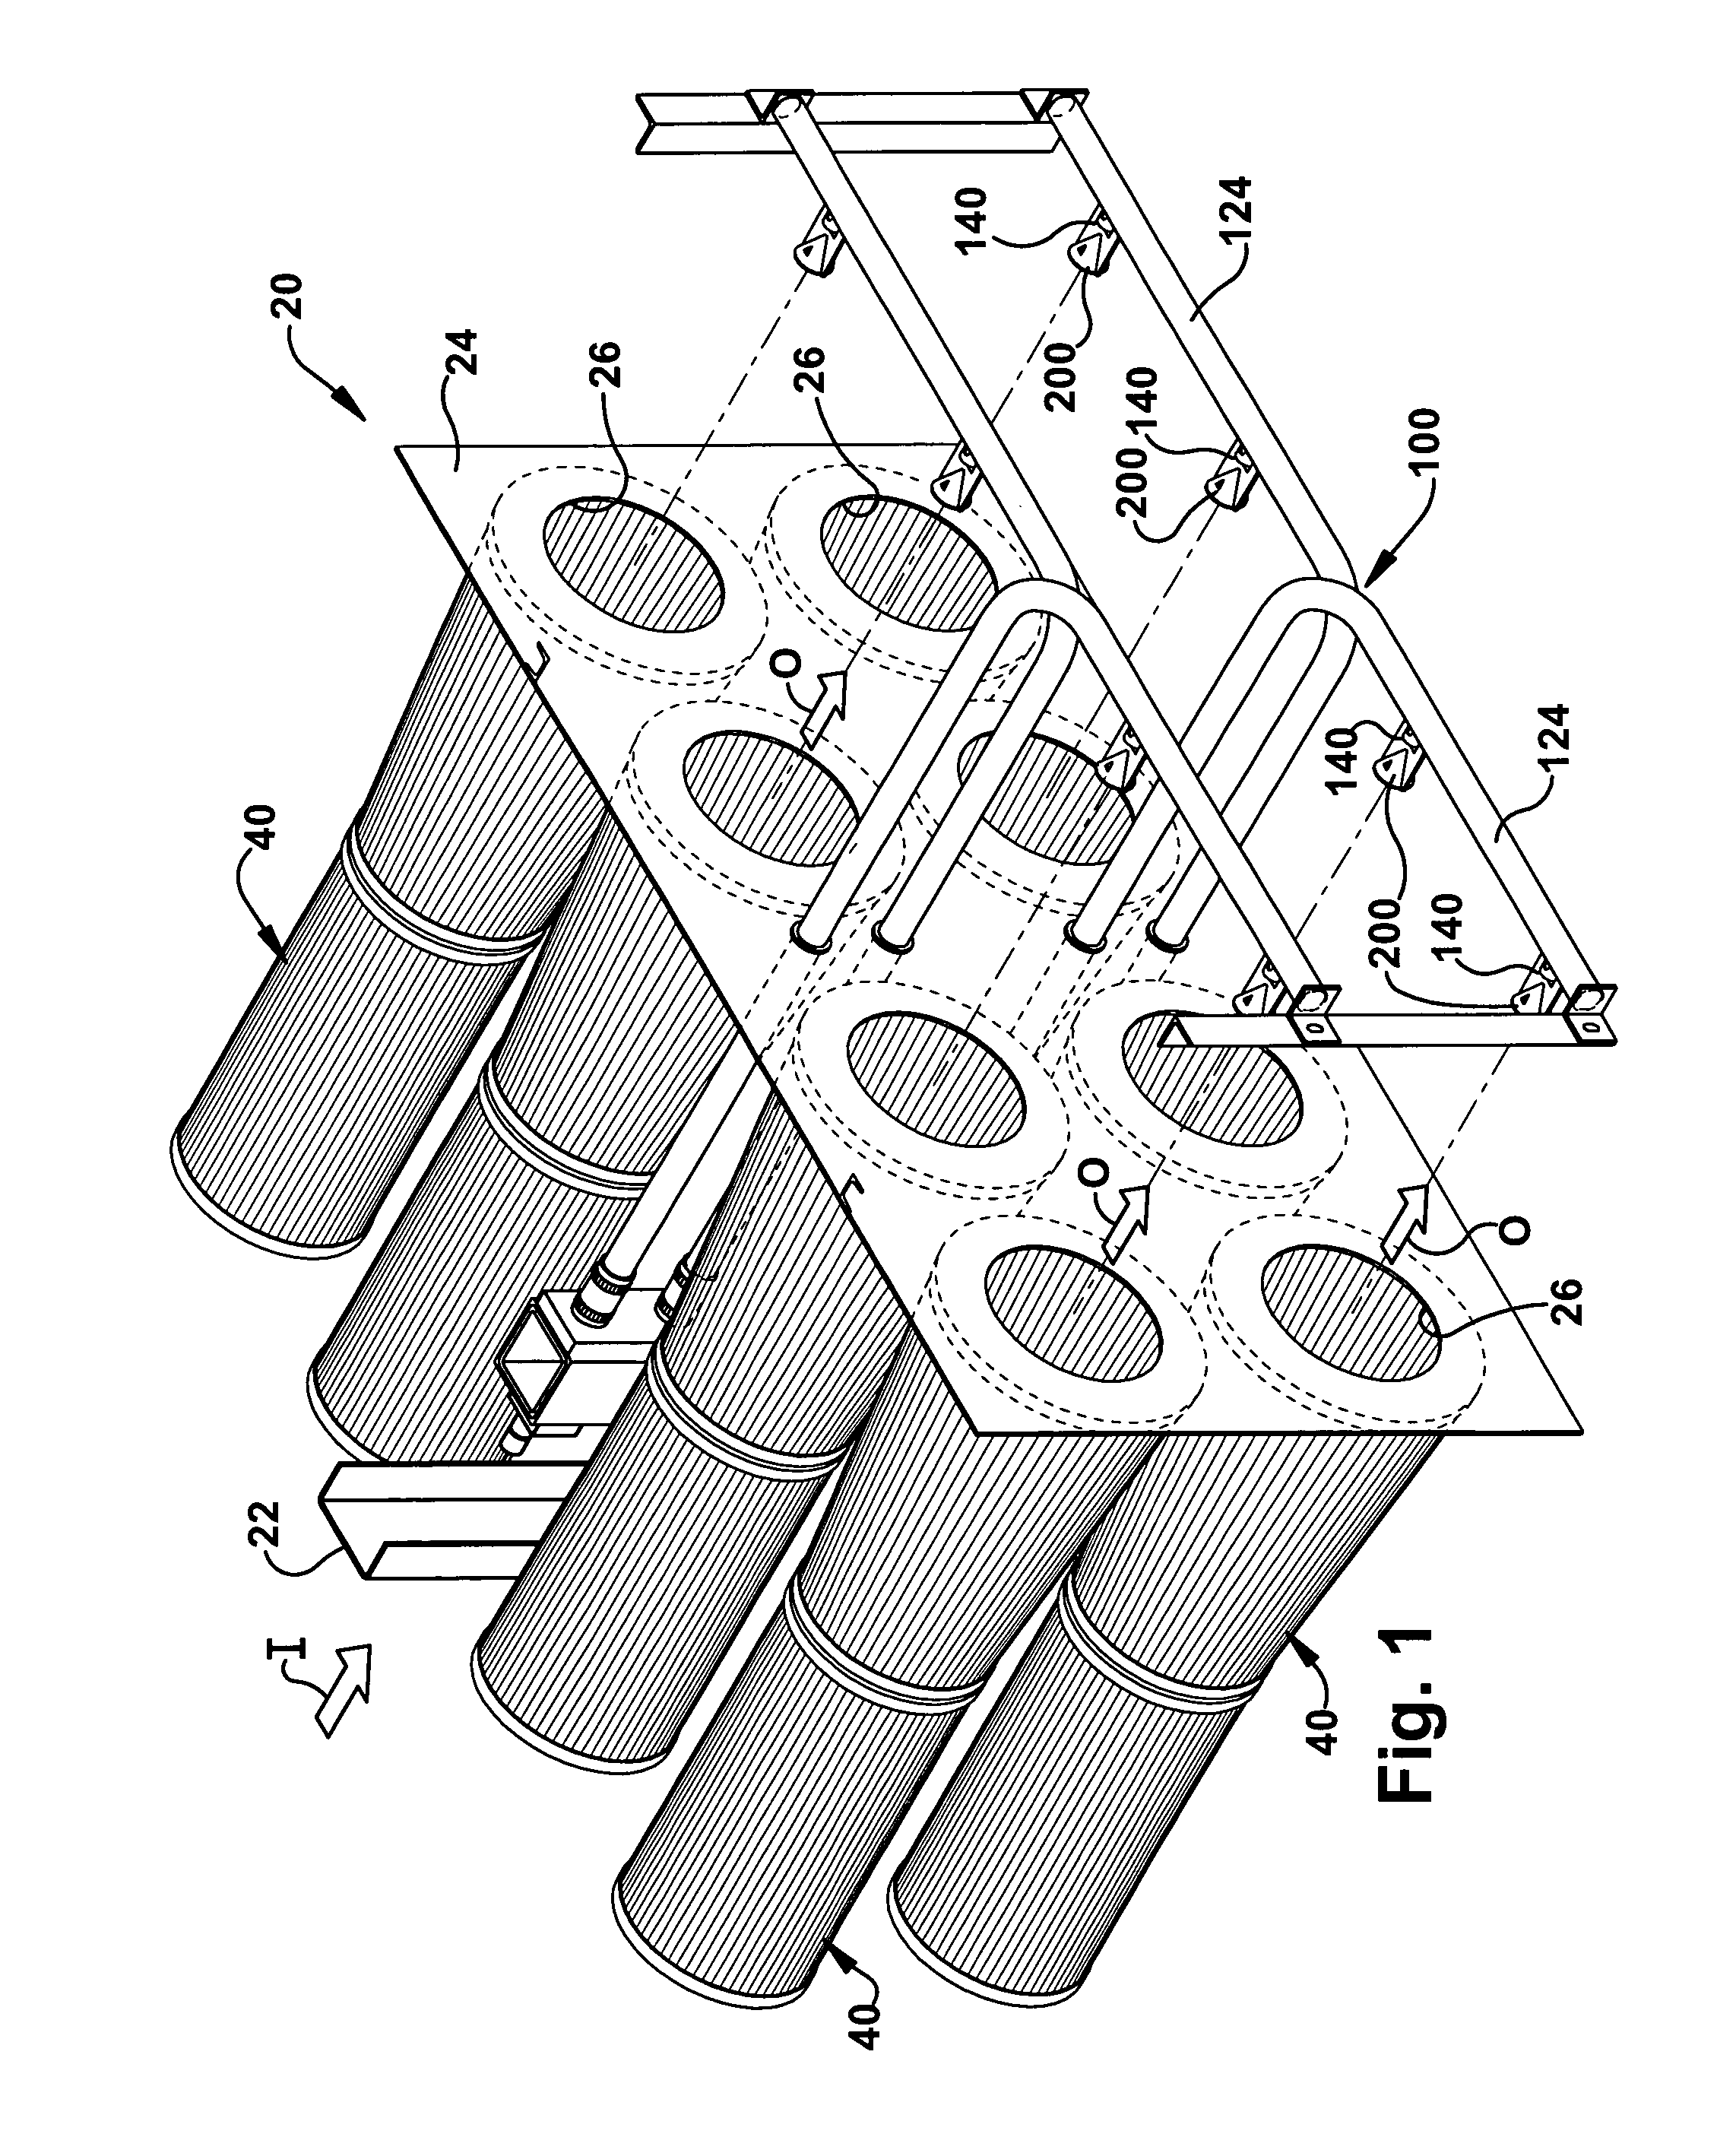 Filter cleaning system and method